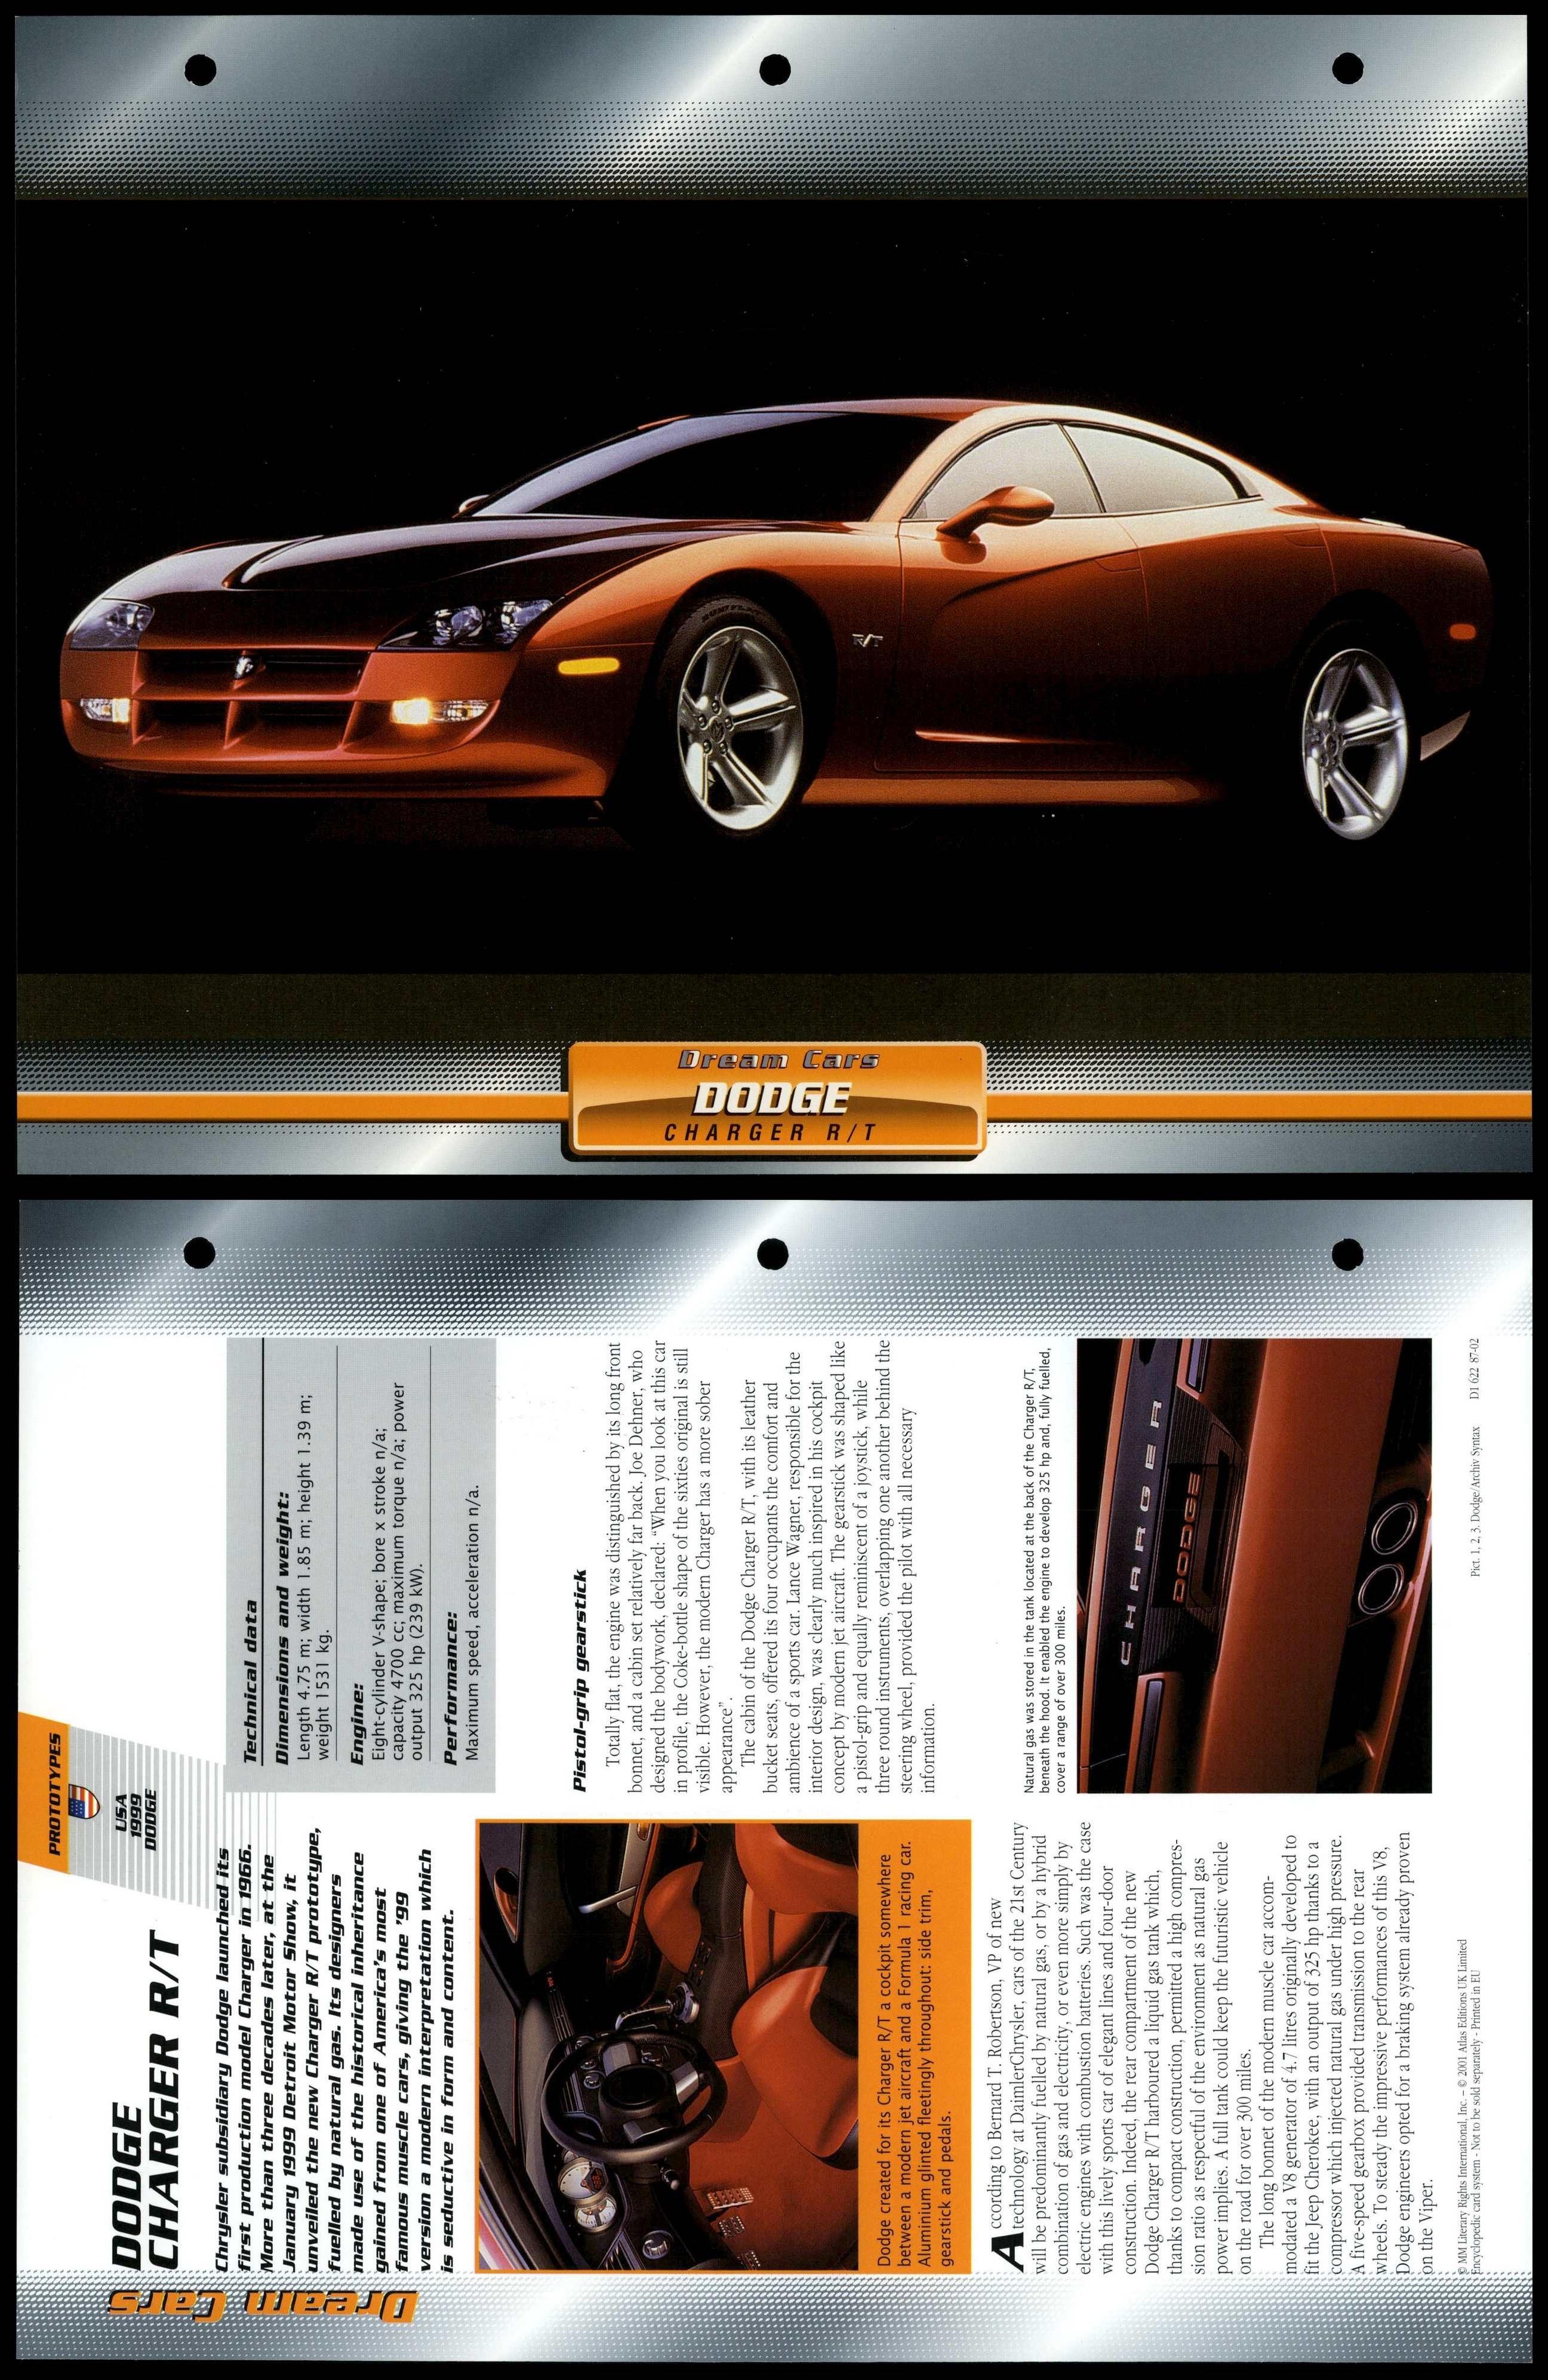 Dodge Charger R/T - 1999 - Prototypes - Atlas Dream Cars Fact File Card